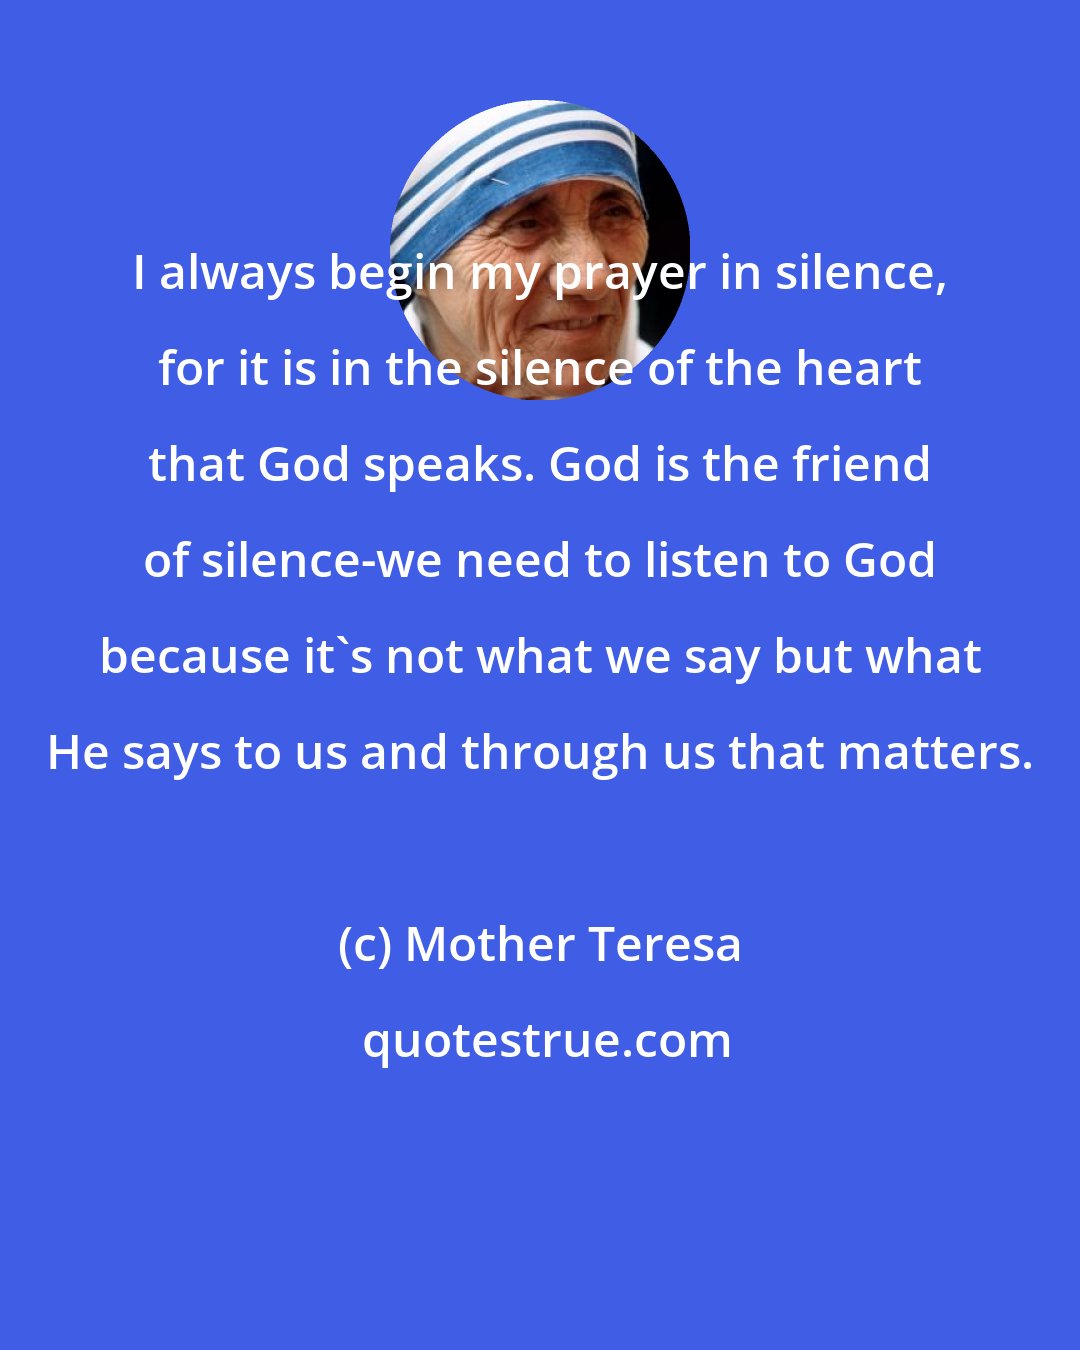 Mother Teresa: I always begin my prayer in silence, for it is in the silence of the heart that God speaks. God is the friend of silence-we need to listen to God because it's not what we say but what He says to us and through us that matters.